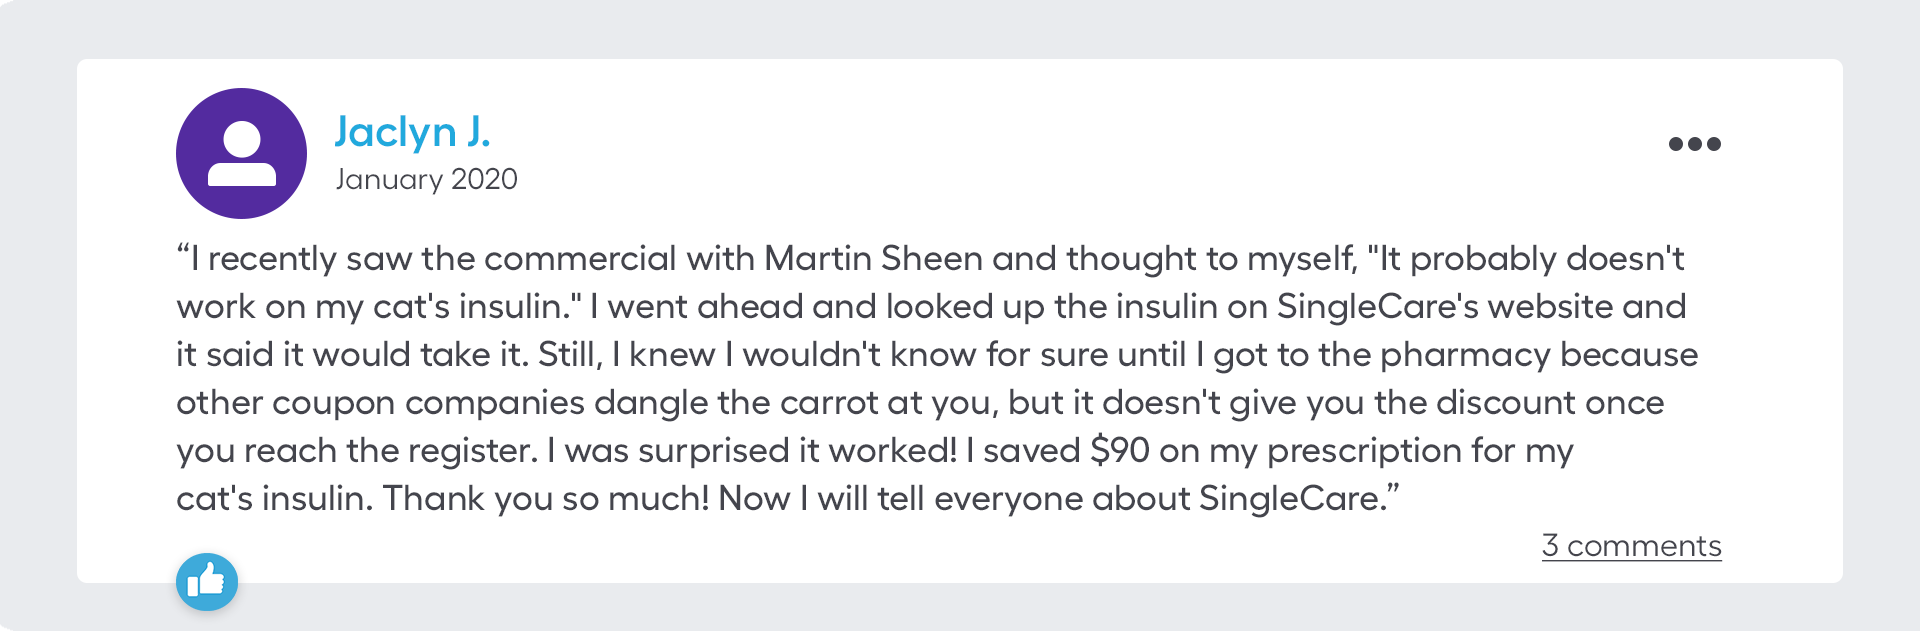 I recently saw the commercial with Martin Sheen and thought to myself, "It probably doesn't work on my cat's insulin." I went ahead and looked up the insulin on SingleCare's website and it said it would take it. Still, I knew I wouldn't know for sure until I got to the pharmacy because other coupon companies dangle the carrot at you, but it doesn't give you the discount once you reach the register. I was surprised it worked! I saved $90 on my prescription for my cat's insulin. Thank you so much! Now I will tell everyone about SingleCare.